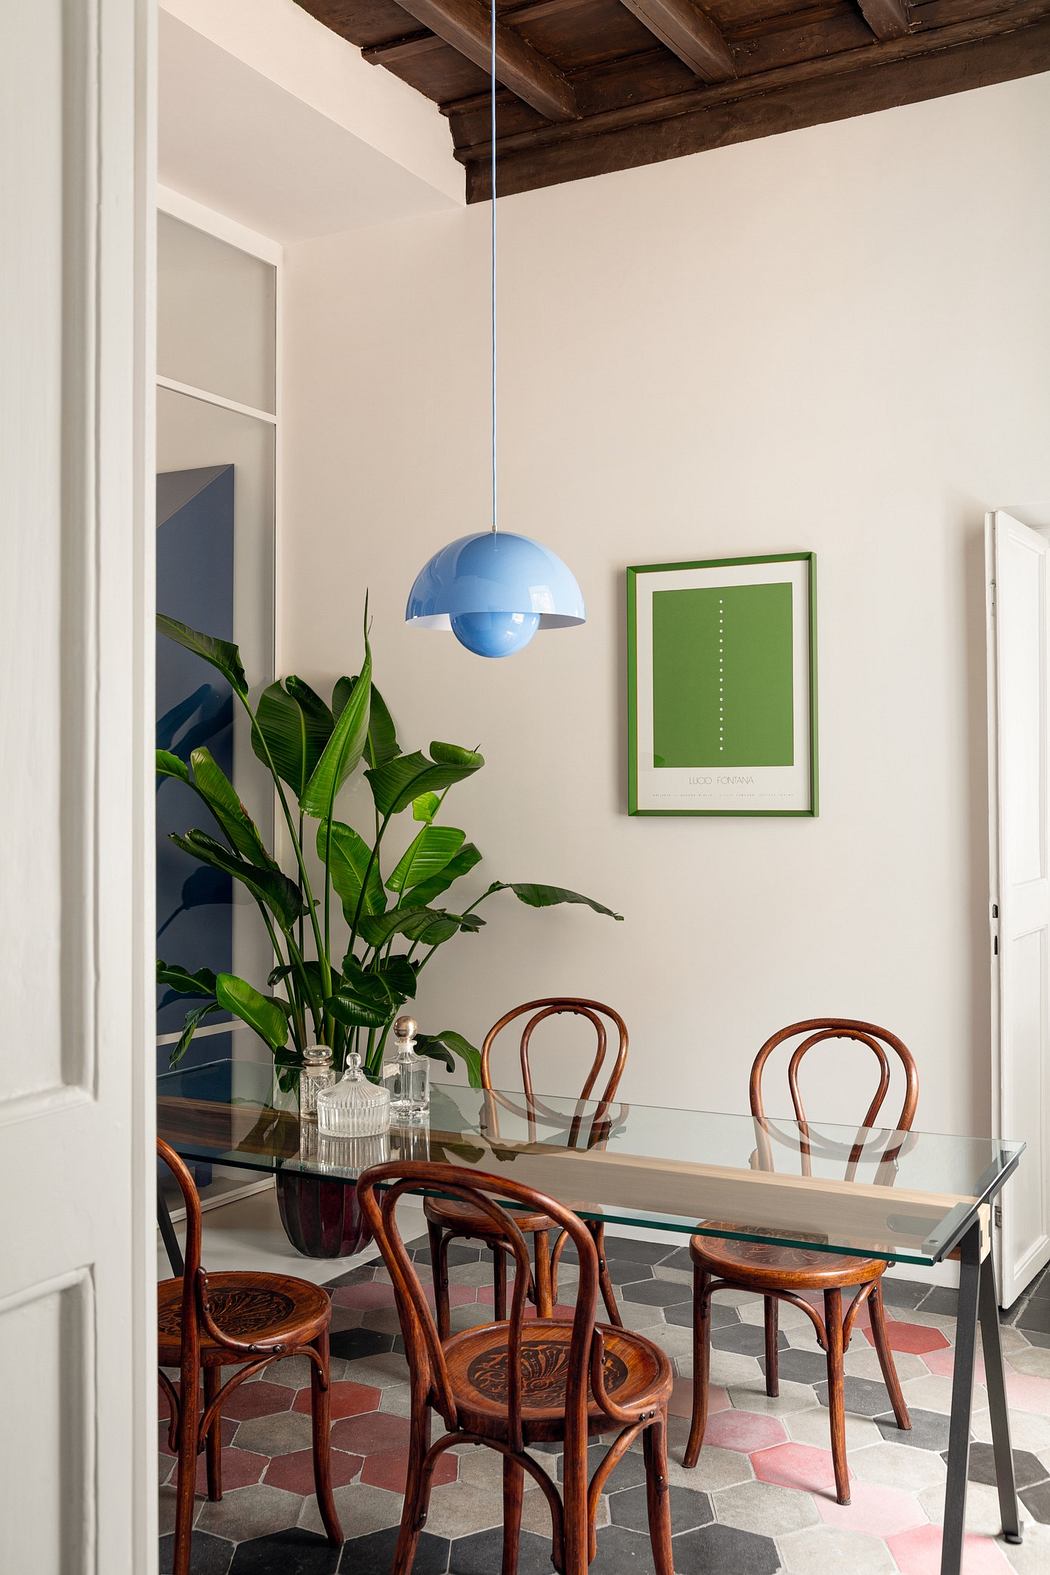 Modern dining room with glass table, bentwood chairs, blue pendant light, and